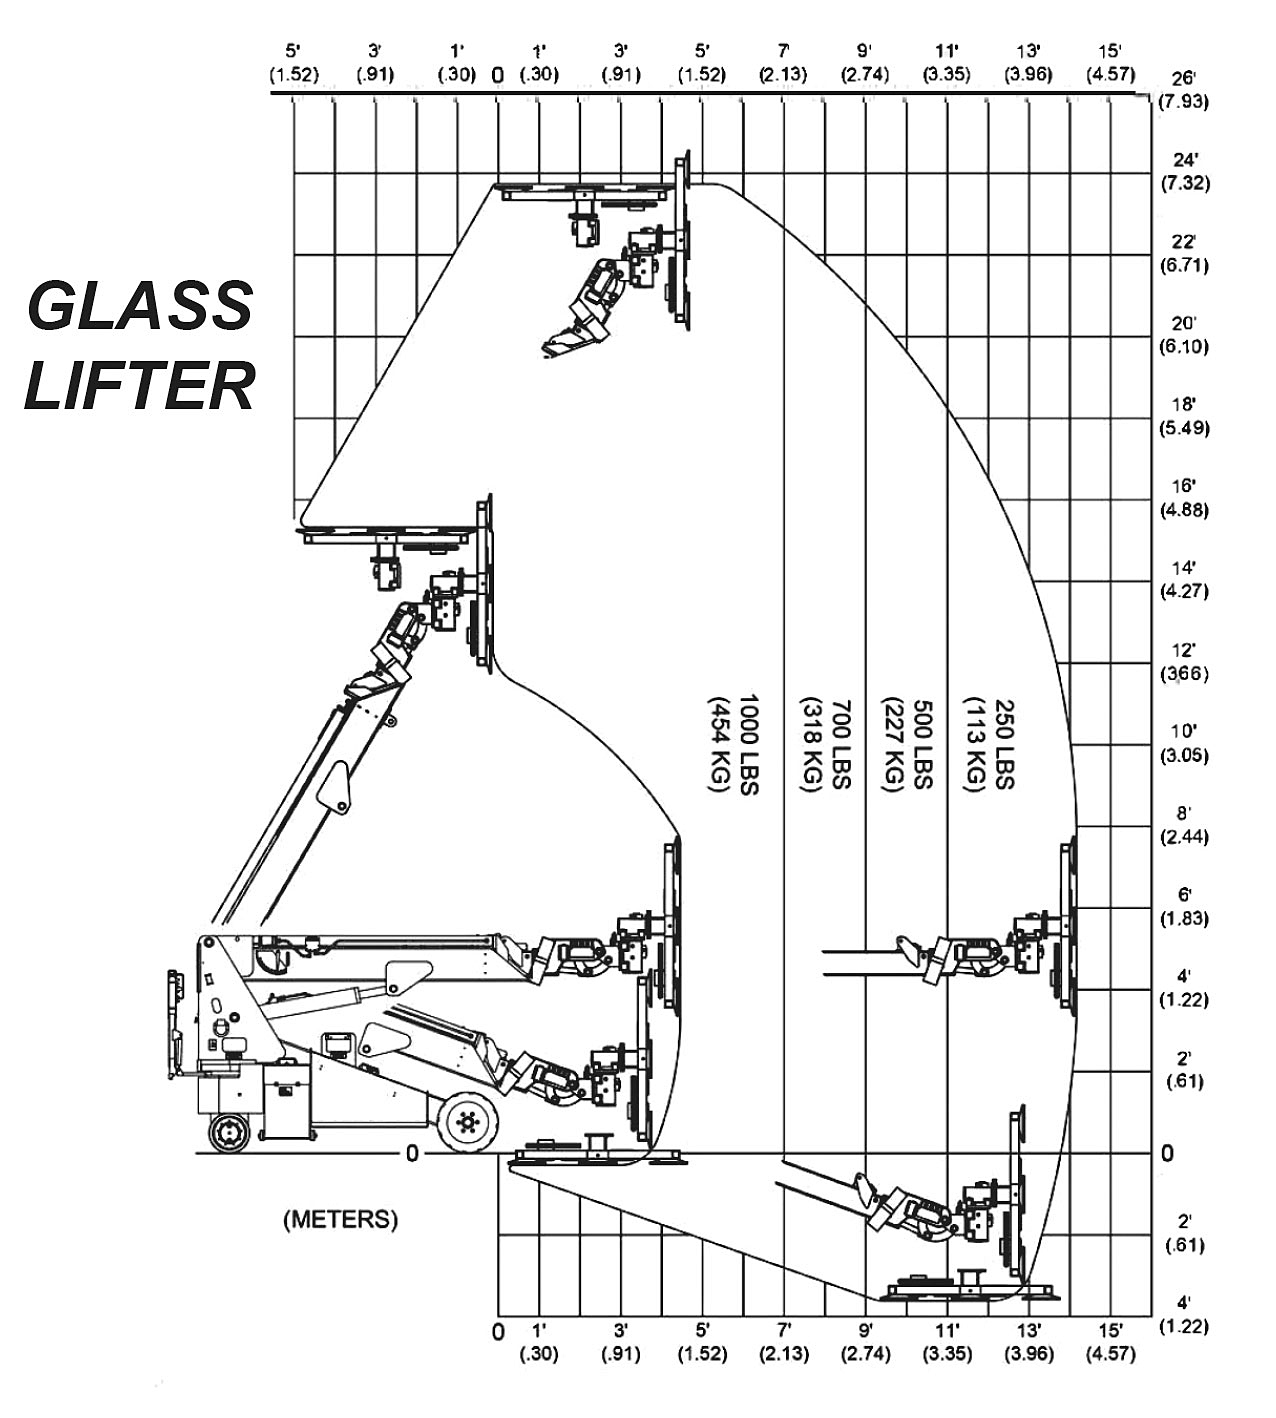 The Junior Glass Lifter Load Capacity